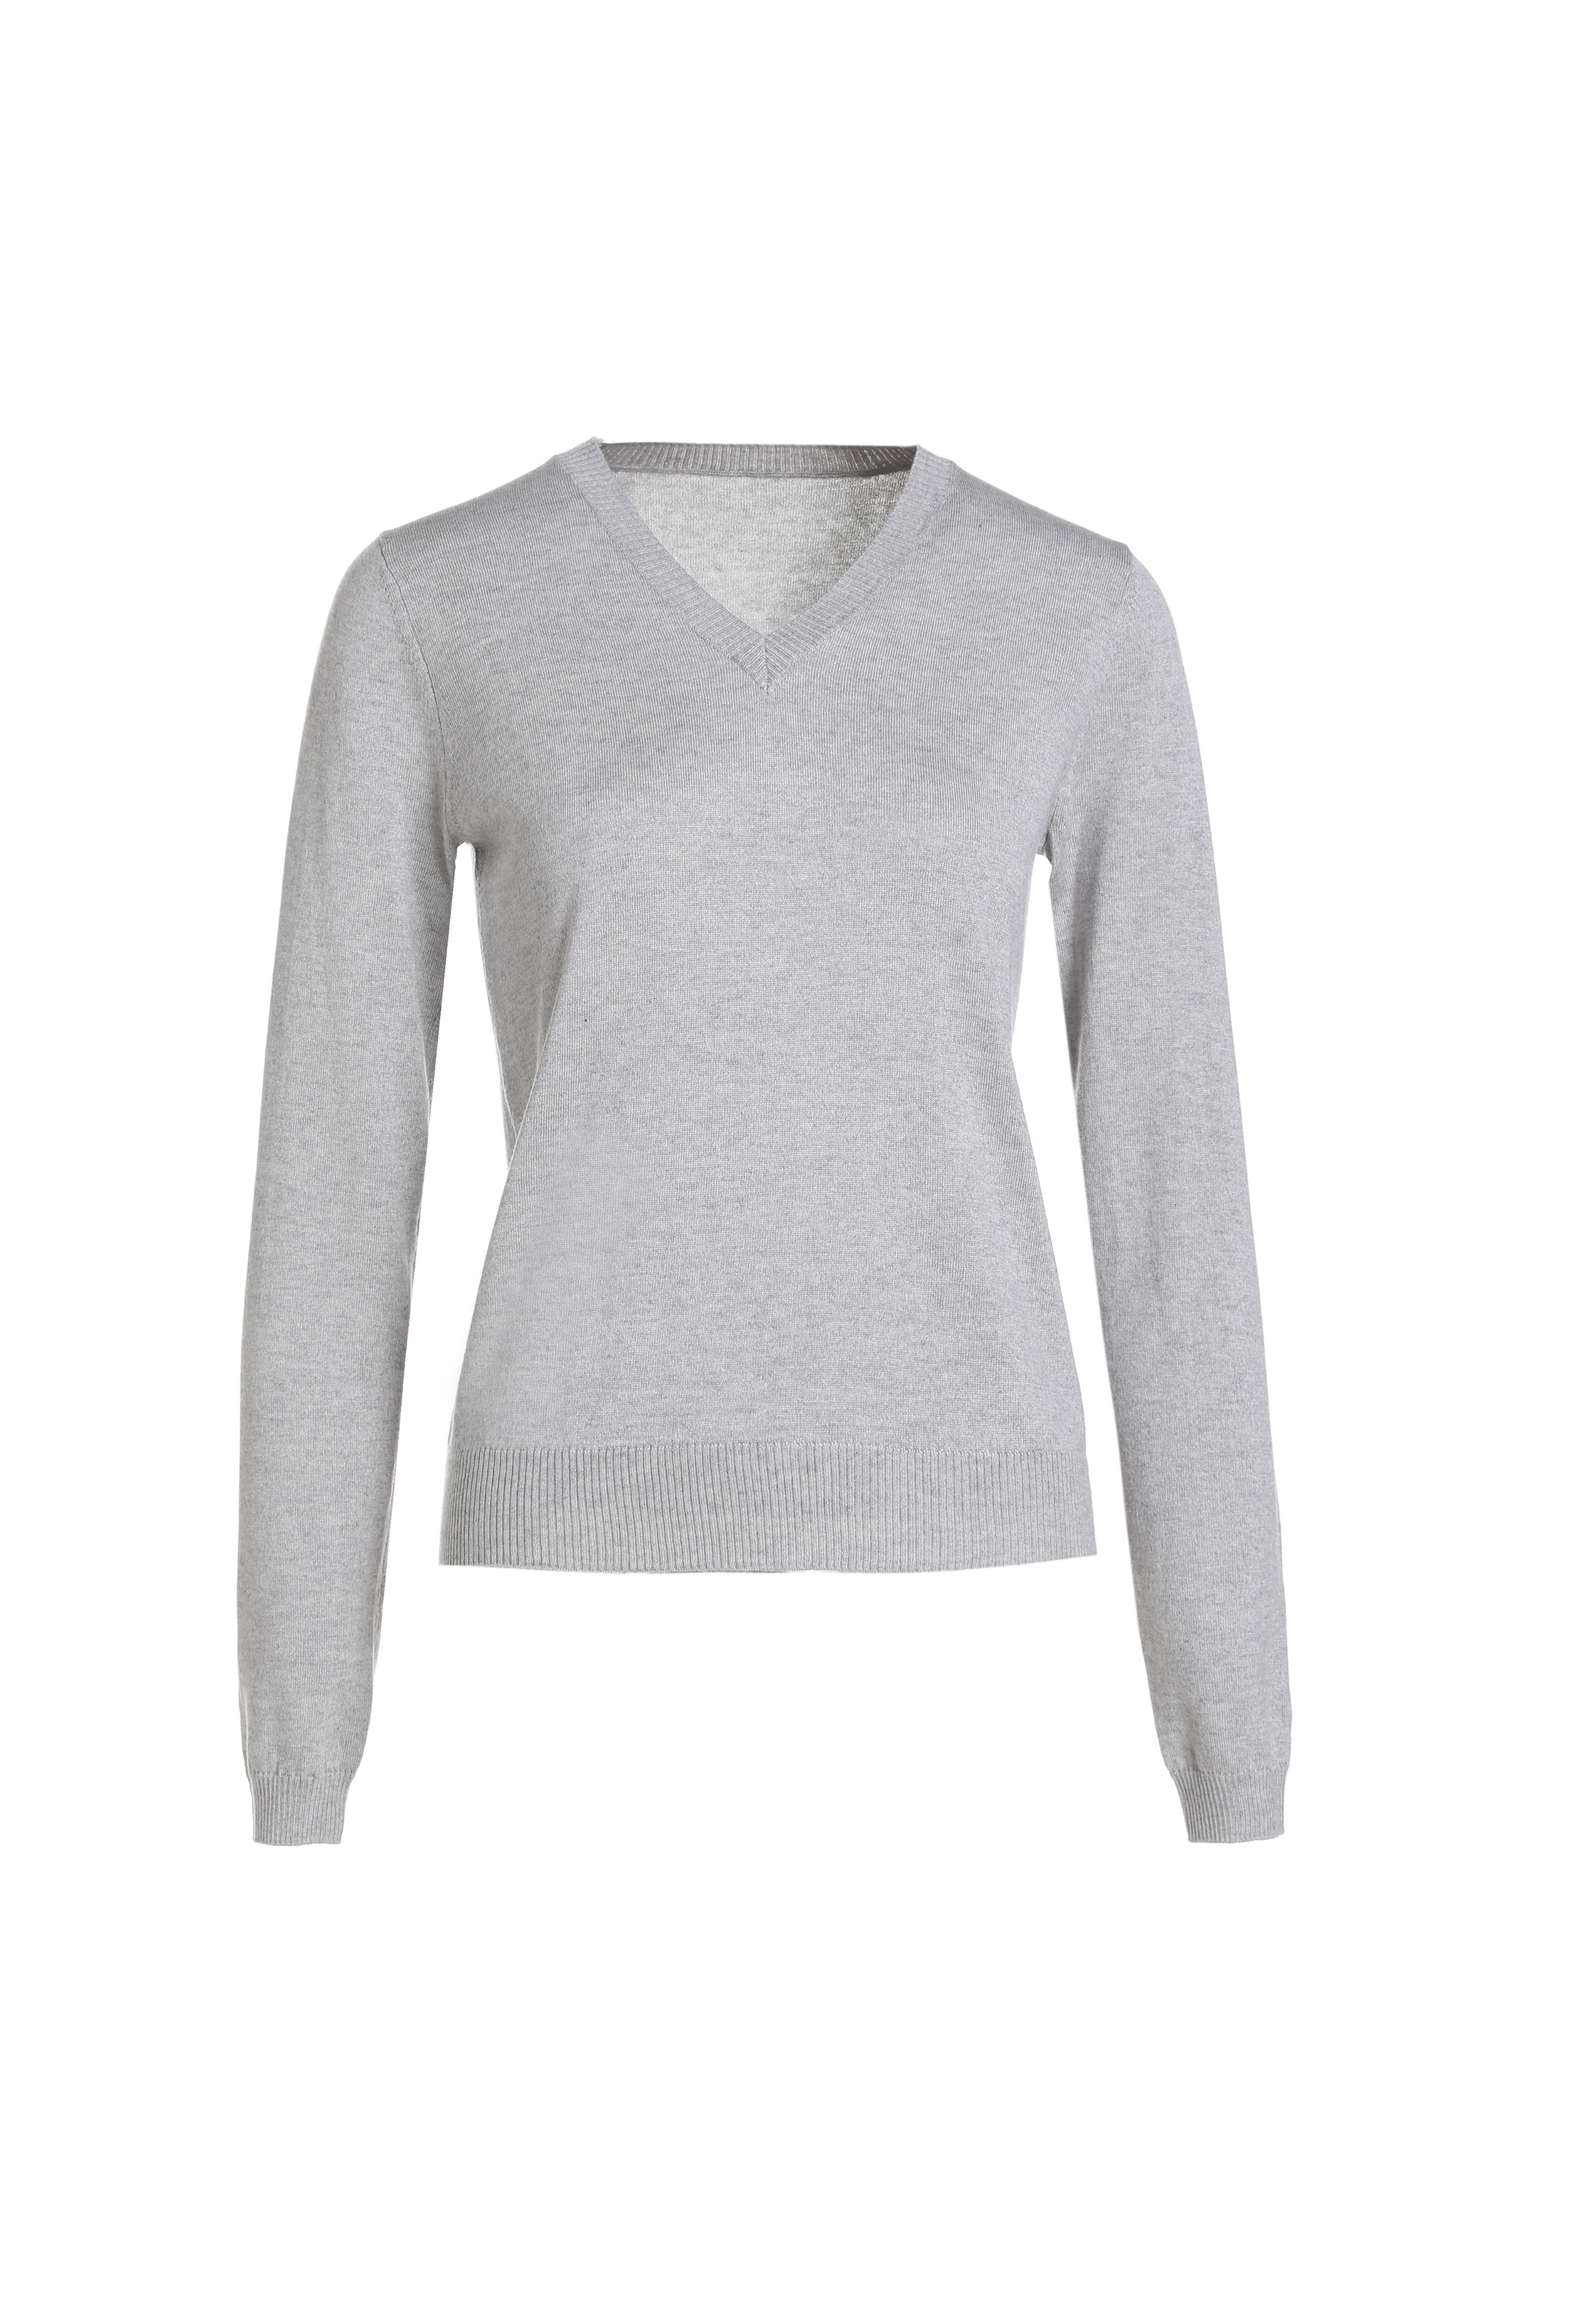 Women's Sweater/ Cashmere/ V-Neck Long Sleeves